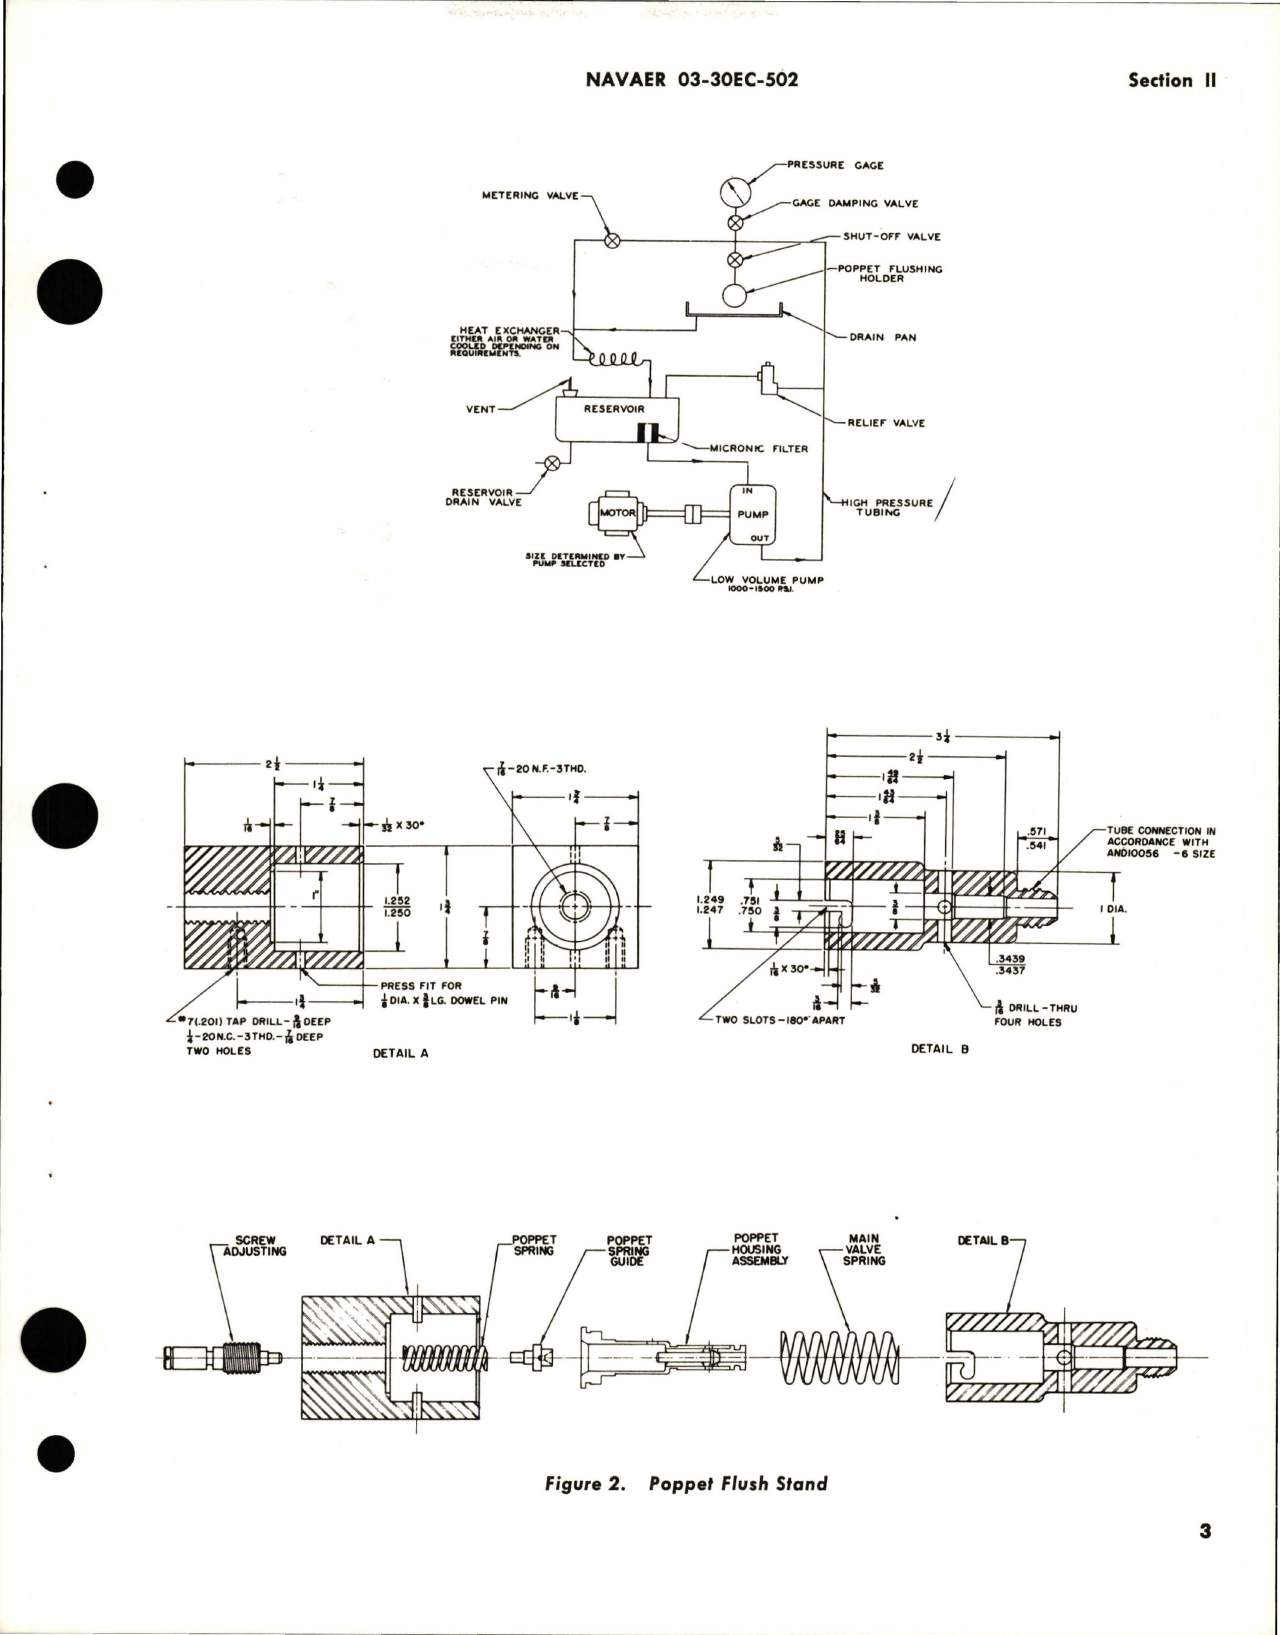 Sample page 7 from AirCorps Library document: Overhaul Instructions for Hydraulic Pressure Relief Valves